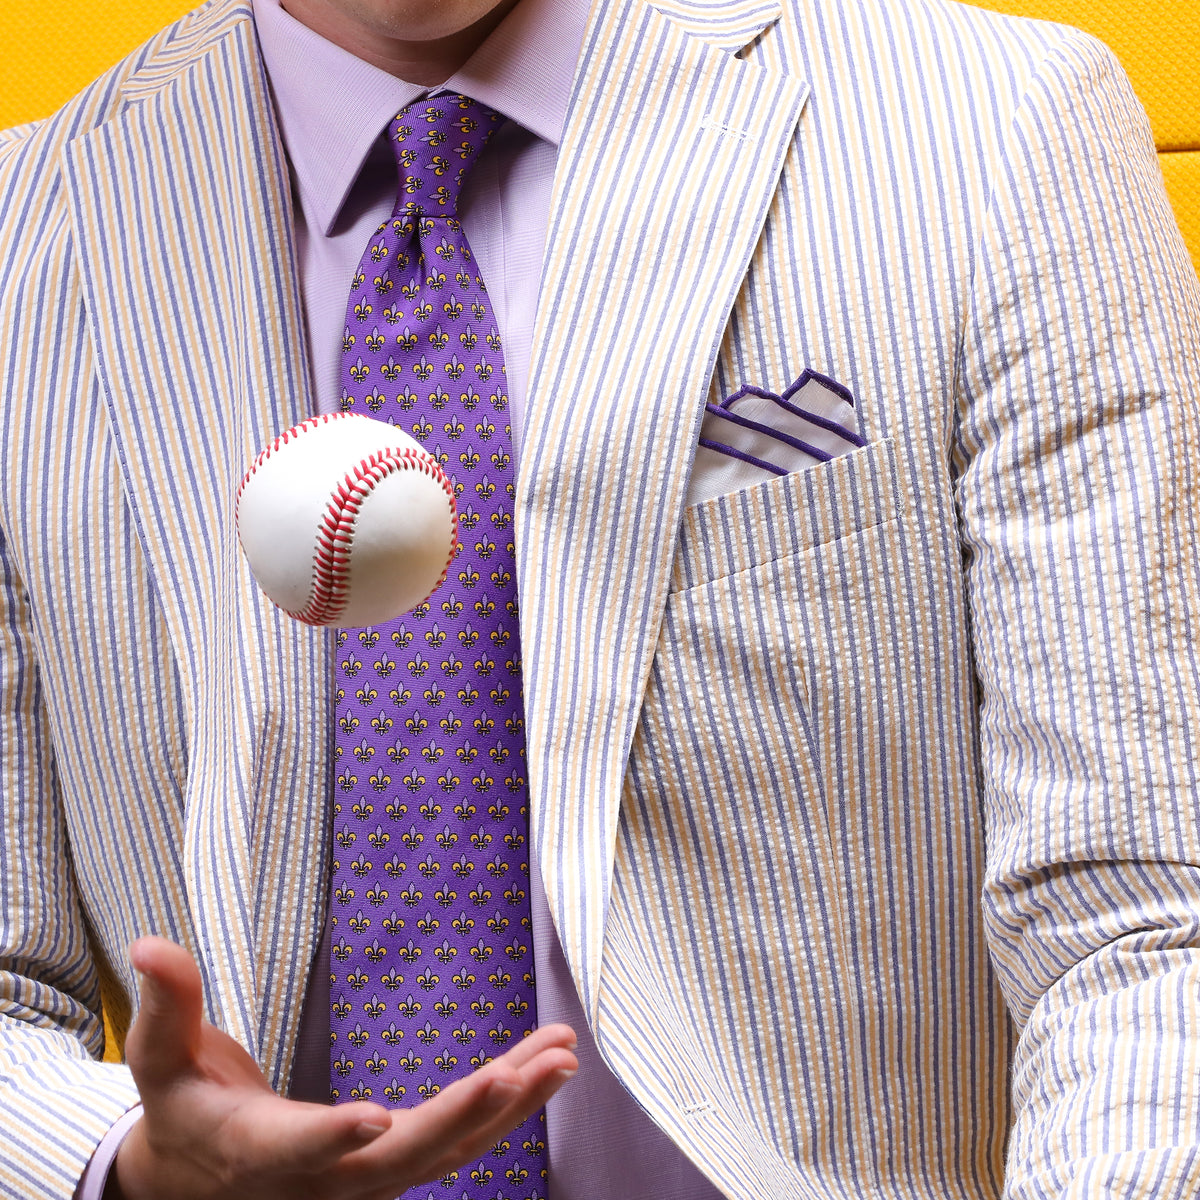 Show your purple &amp; gold spirit in our Embassy Purple &amp; Gold Seersucker Suit.  ** Pant waist is 6&quot; smaller than the chest measurement. For example, if you order a 40R jacket, the pant size will be 34 **  100% Cotton Haspel Exclusive Seersucker • Maximized Seersucker Pucker • Audubon Classic Fit • Natural Shoulder • Two Buttons • Flap Pockets • 3/4 Lined for Maximum Cool • Side Vents • Notch Lapel • Dry Clean • Imported